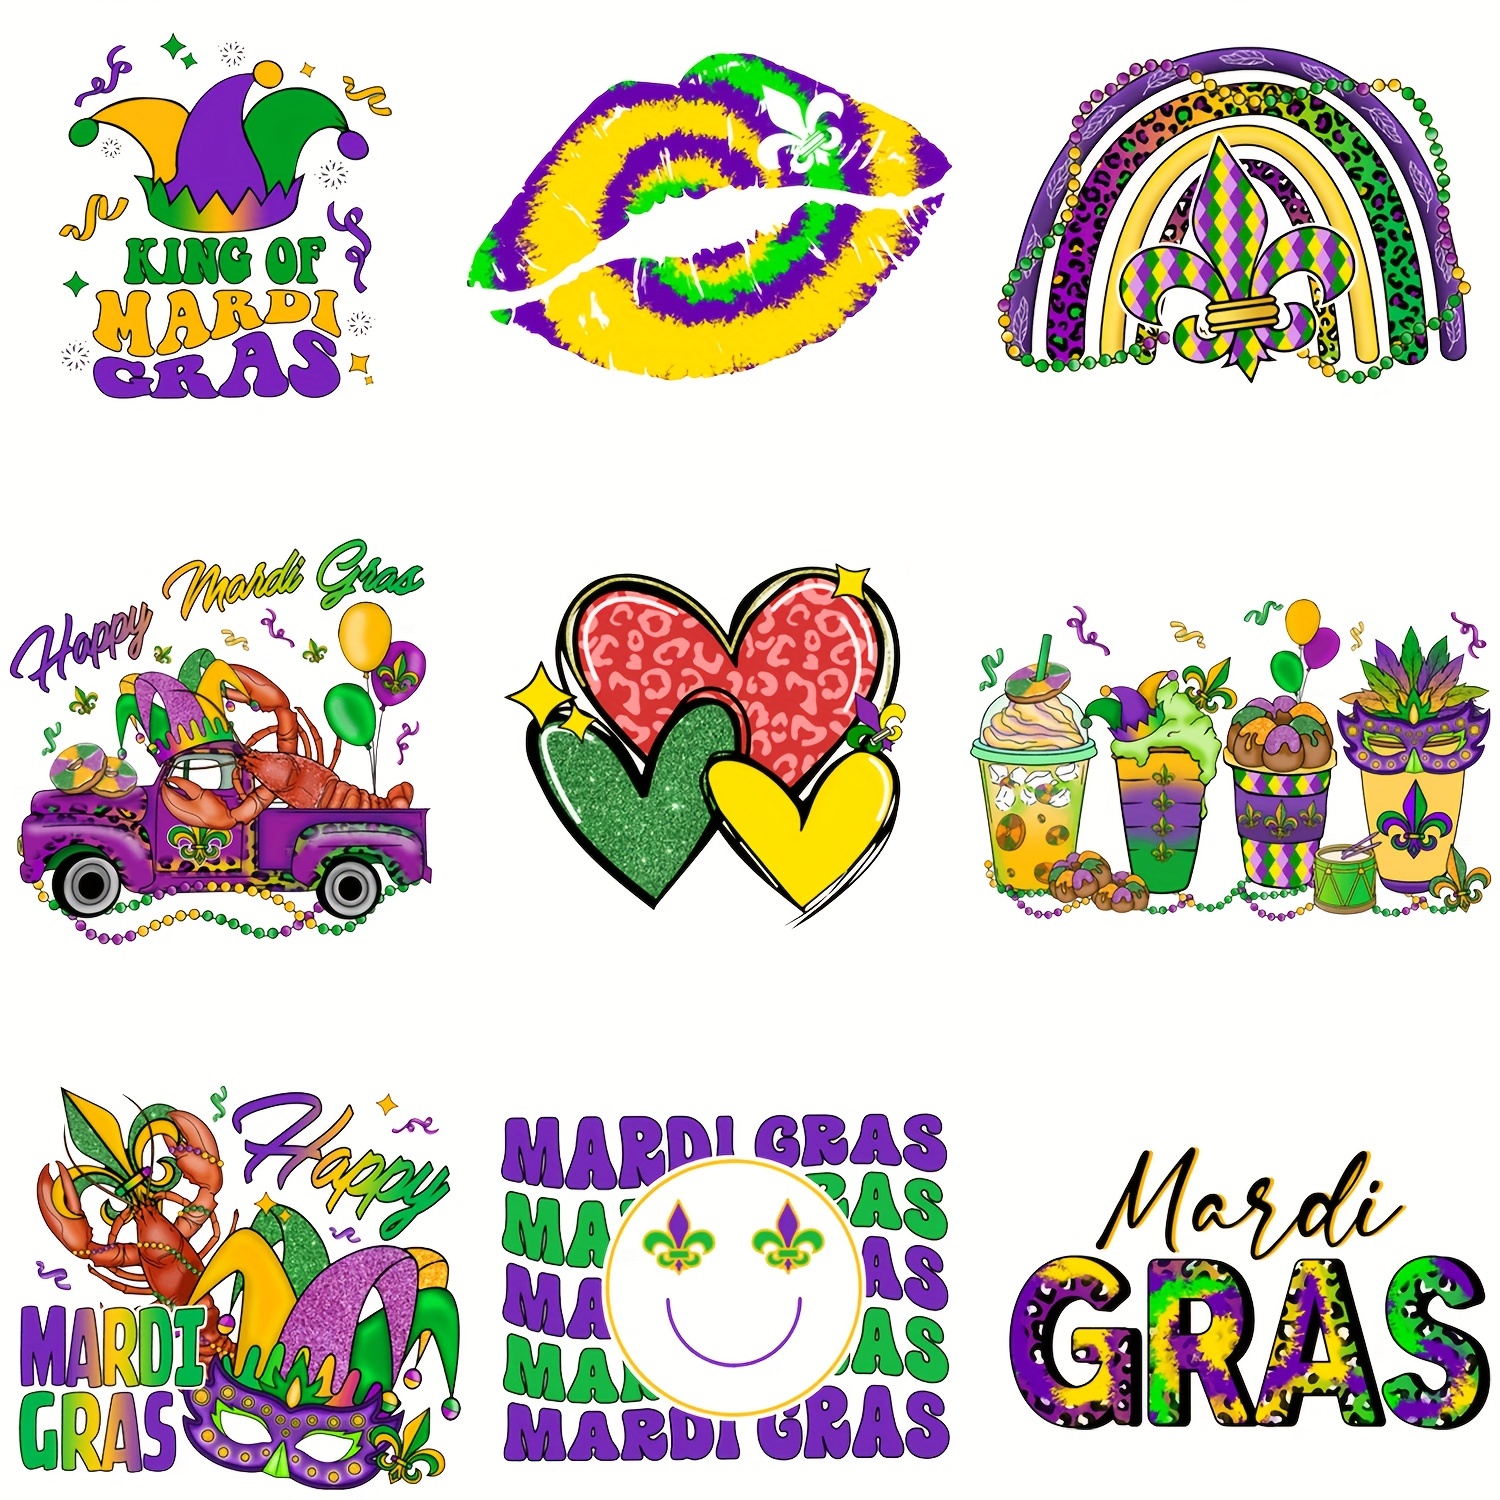 10pcs Mardi Gras Iron On Decals For T-shirts Clothing Carnival Iron On  Transfer Stickers Decals Letters Design Appliques Iron On Transfer Patches  For T-shirts Jackets, Check Out Today's Deals Now